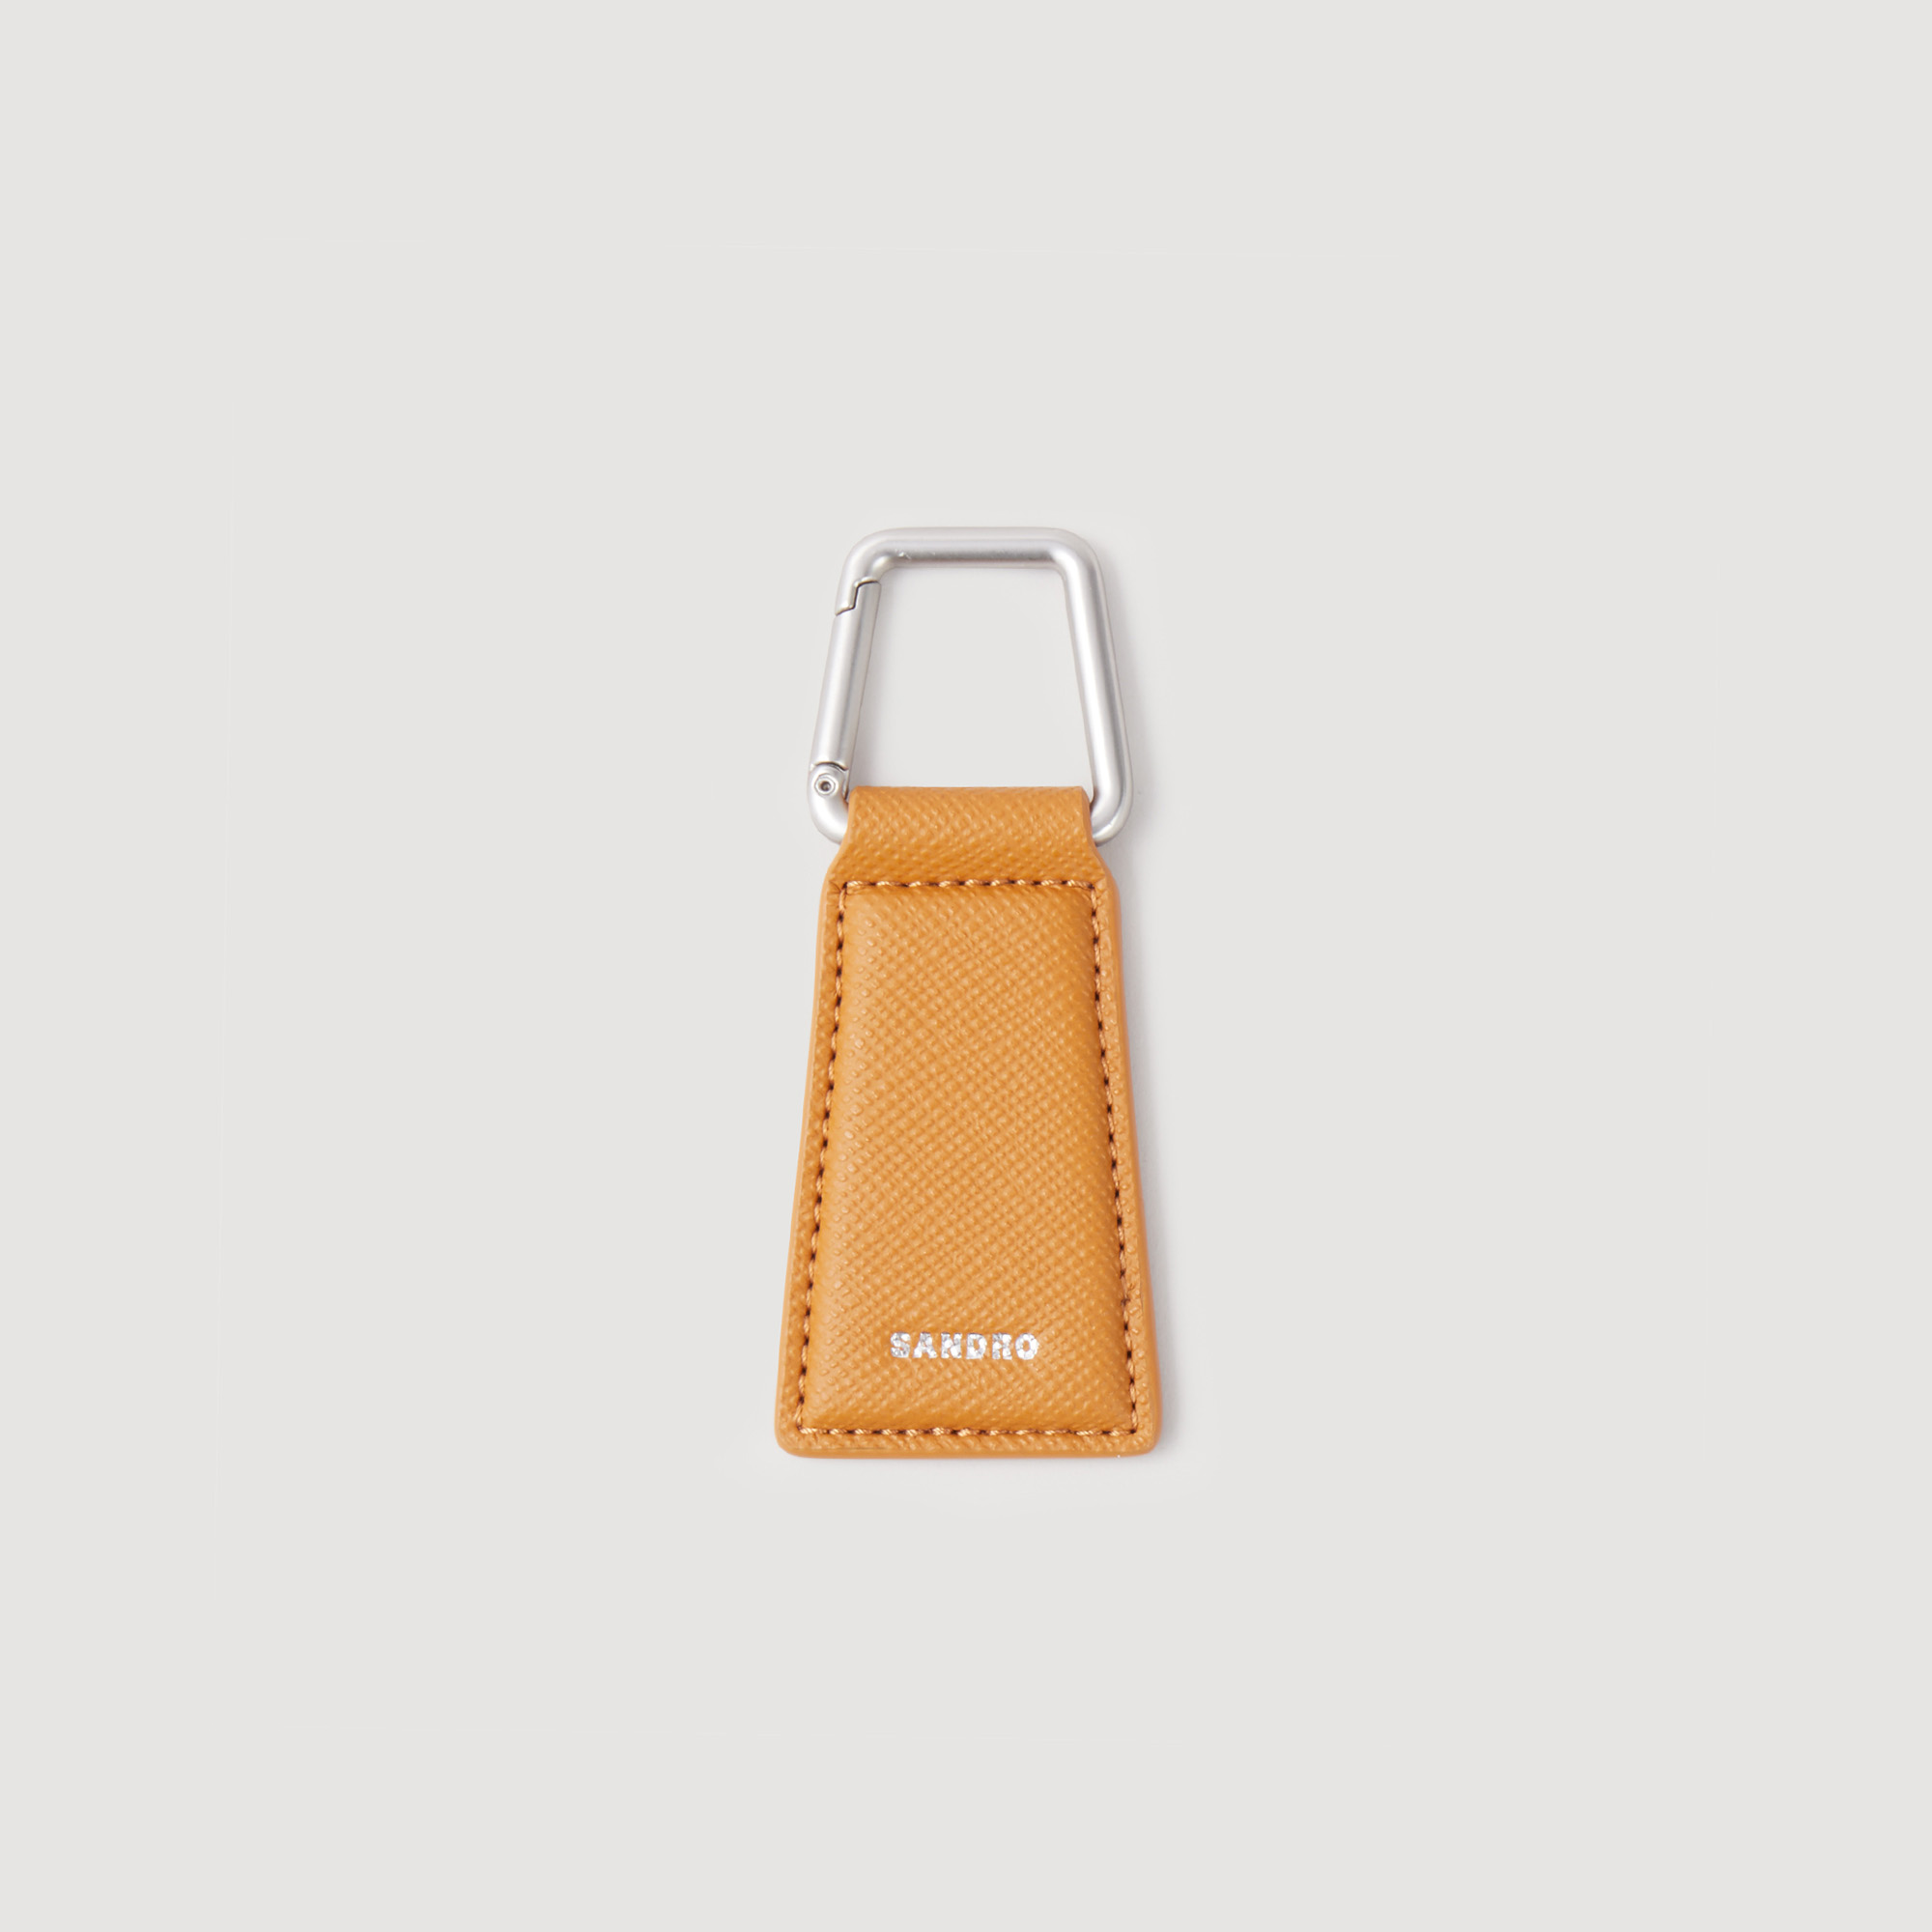 Sandro synderm Coating: Key ring in saffiano leather embellished with Sandro lettering and fitted with a metal lobster clasp